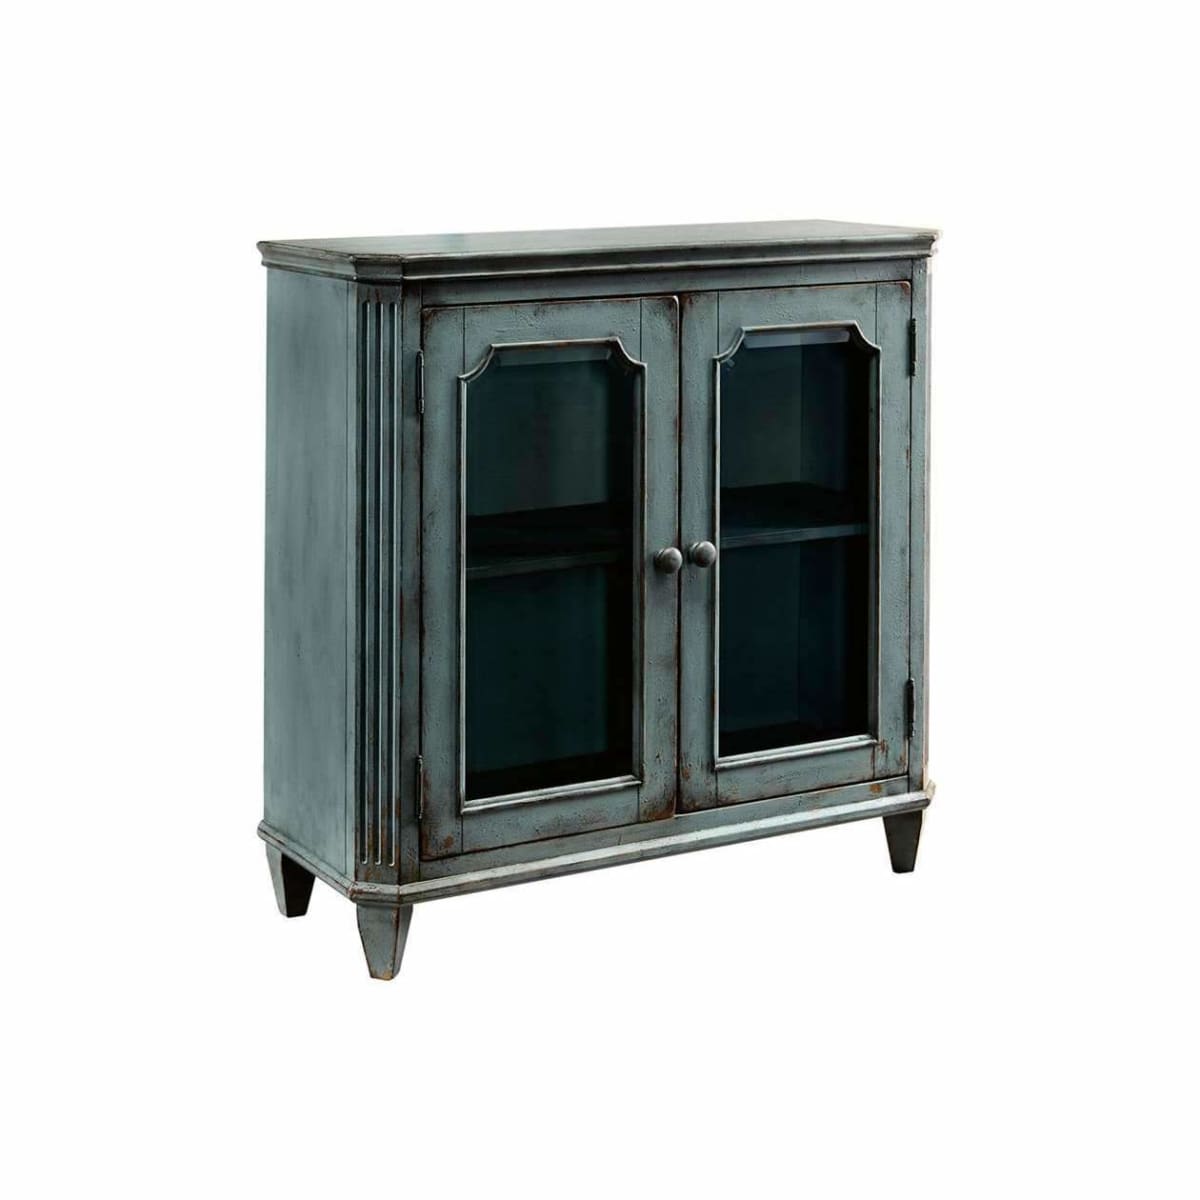 Mirimyn Antique Teal Small Accent Cabinet - accent cabinet